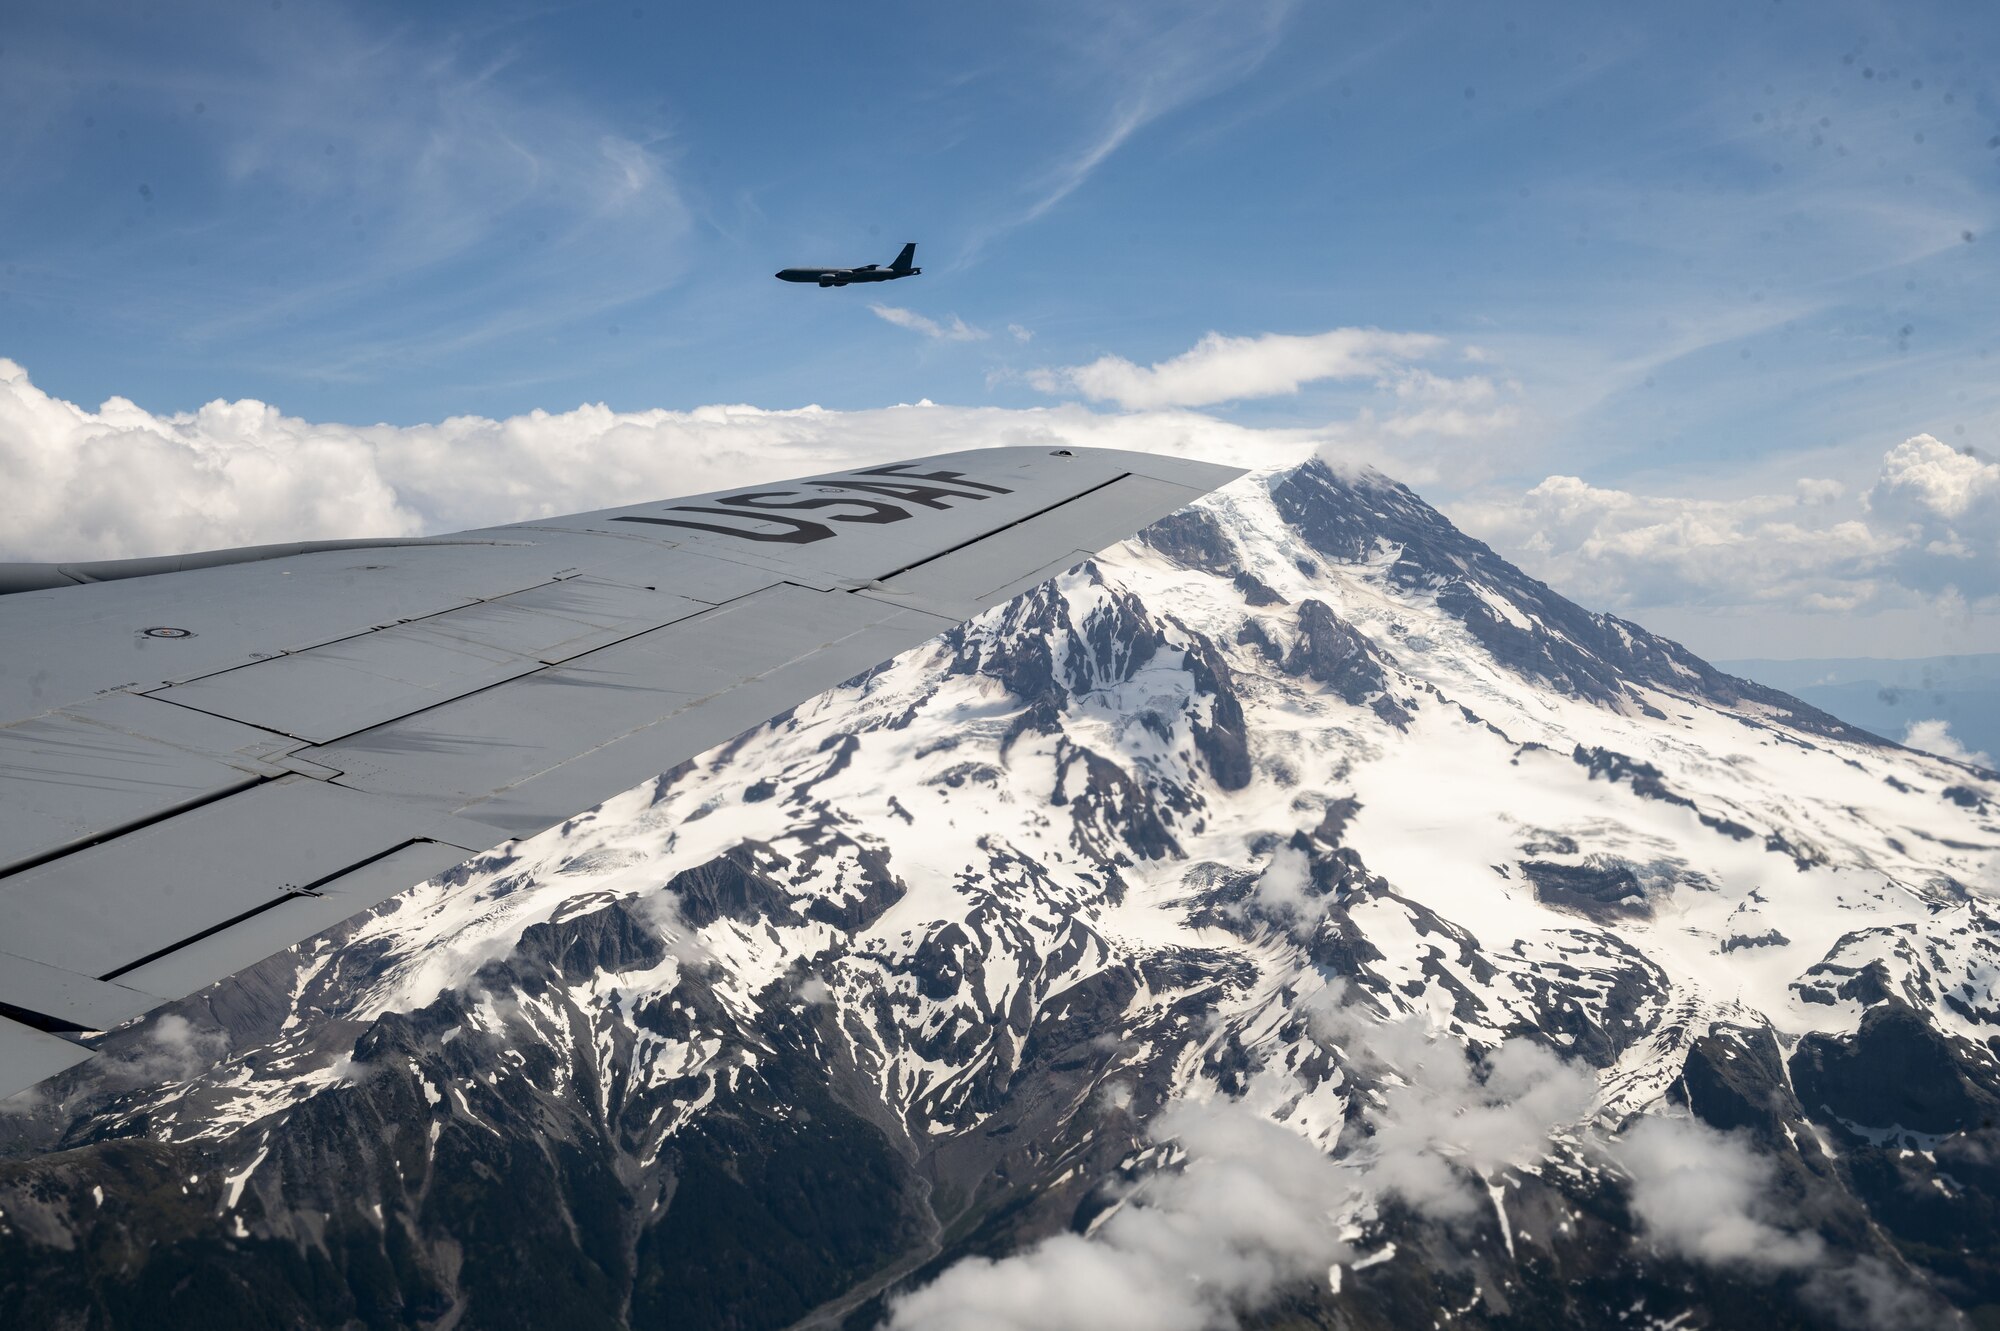 KC-135 Stratotankers assigned to Fairchild Air Force Base, Washington, fly over Mount Rainier, Washington, as part of Operation Centennial Contact June 27, 2023. The movement, which also included flights over Yellowstone National Park, Mount Rushmore and Glacier National Park, was part of Air Mobility Command’s celebration of 100 years air refueling operations and demonstrated the 92nd Air Refueling Wing’s global reach capabilities. Since its inception in 1923, air refueling has become a crucial component of military and civilian aviation operations around the world by extending the range and endurance of aircraft and enabling them to complete missions that would otherwise be impossible or require multiple stops. As a result, this capability is essential for strategic and tactical operations, as well as humanitarian relief efforts in support of AMC, U.S. Transportation Command and Department of Defense priorities. (U.S. Air Force photo by Staff Sgt. Lawrence Sena)